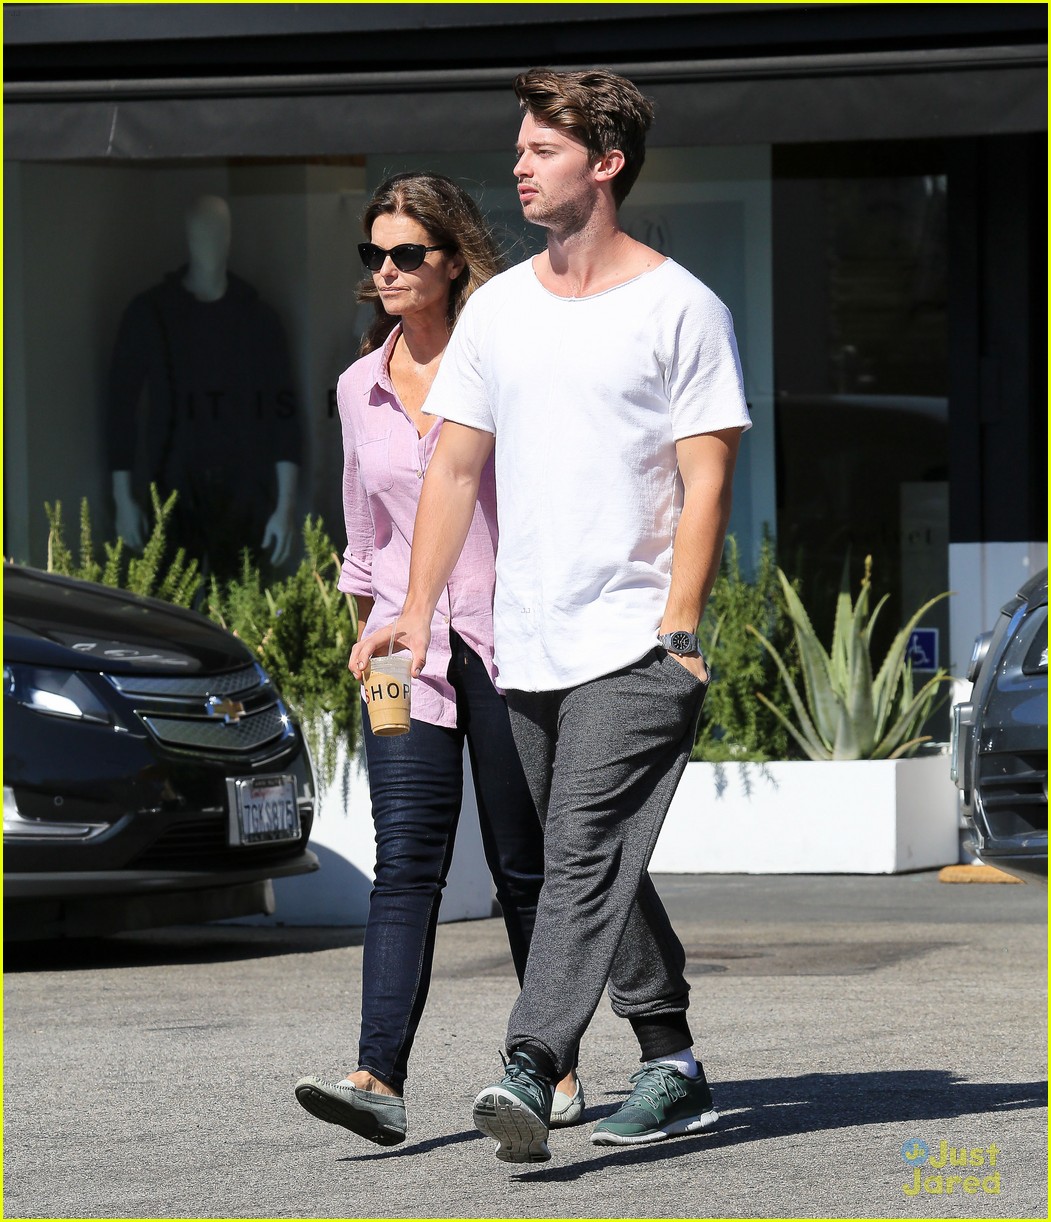 patrick schwarzenegger spends the morning with his mom 10